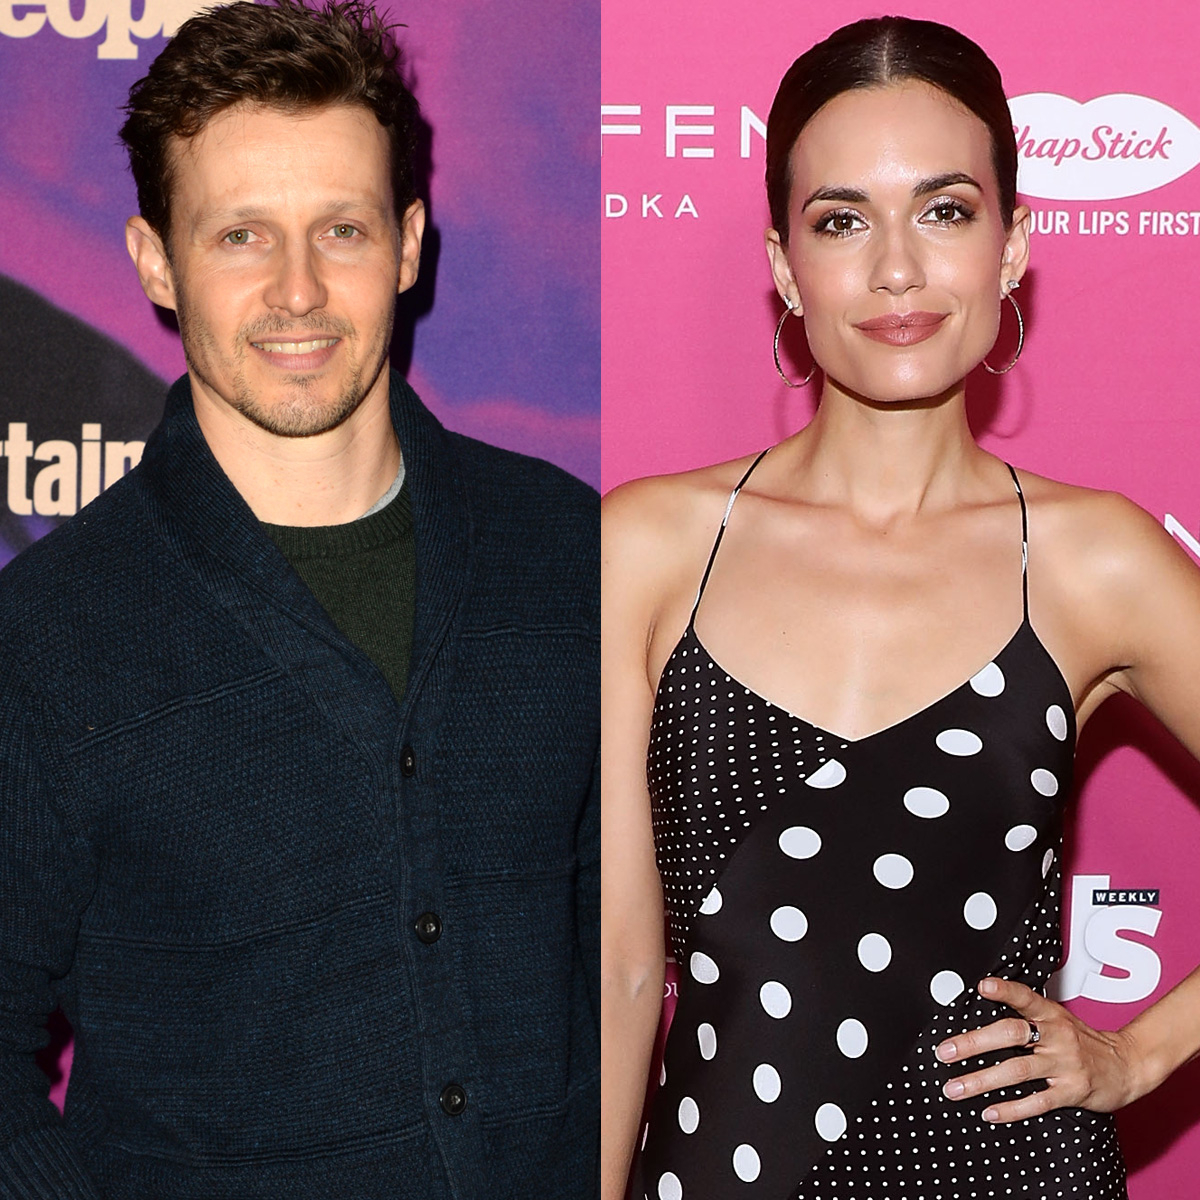 Who is actress Torrey DeVitto dating and who are her ex-boyfriends?